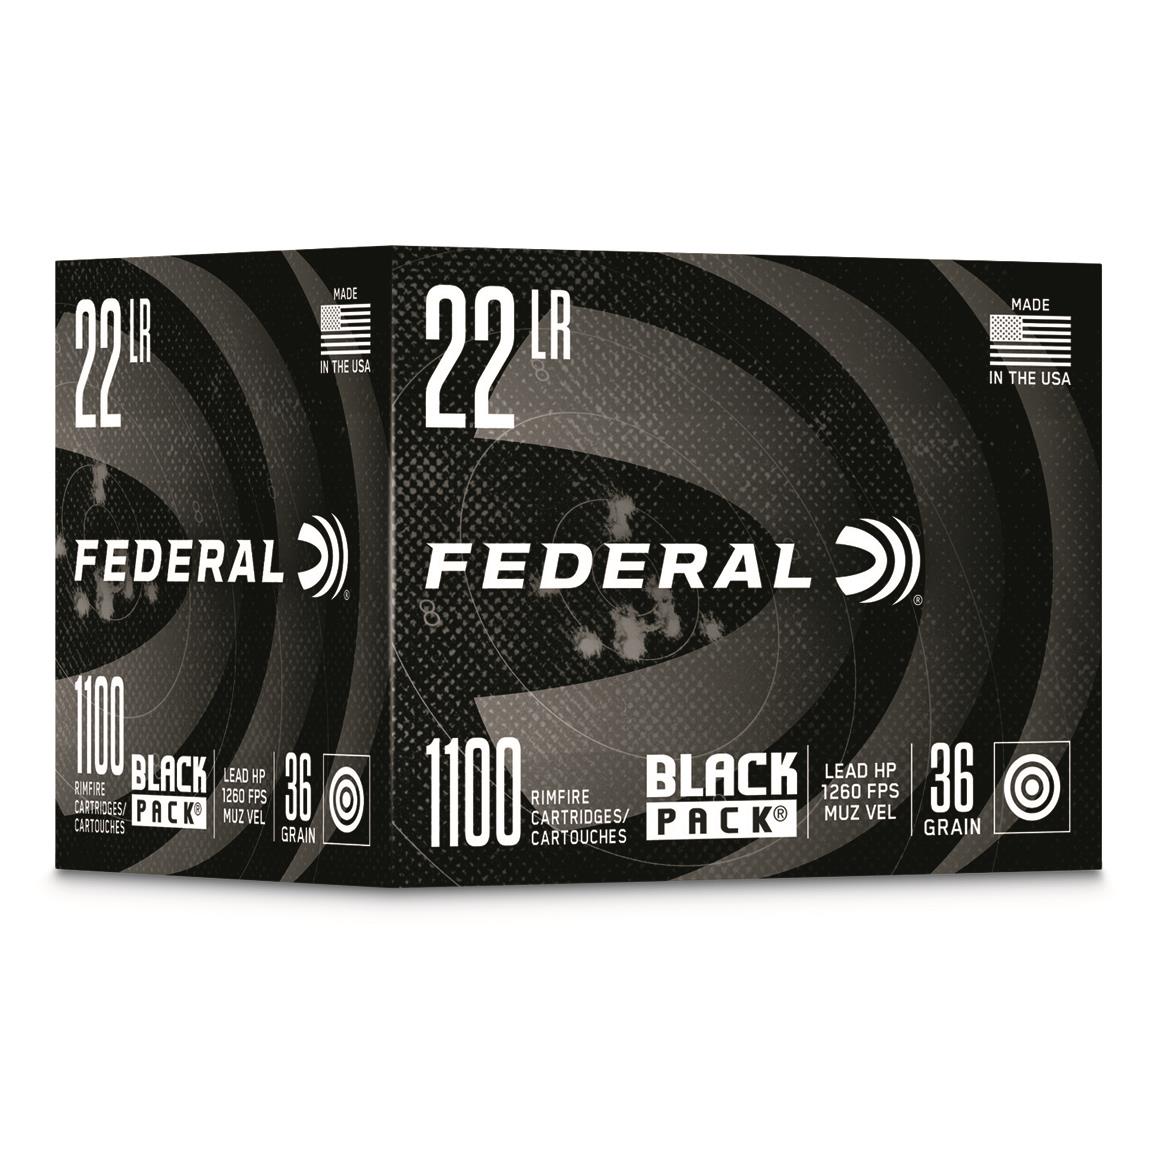 Federal Black Pack, .22LR, CPHP, 36 Grain, 1,100 Rounds